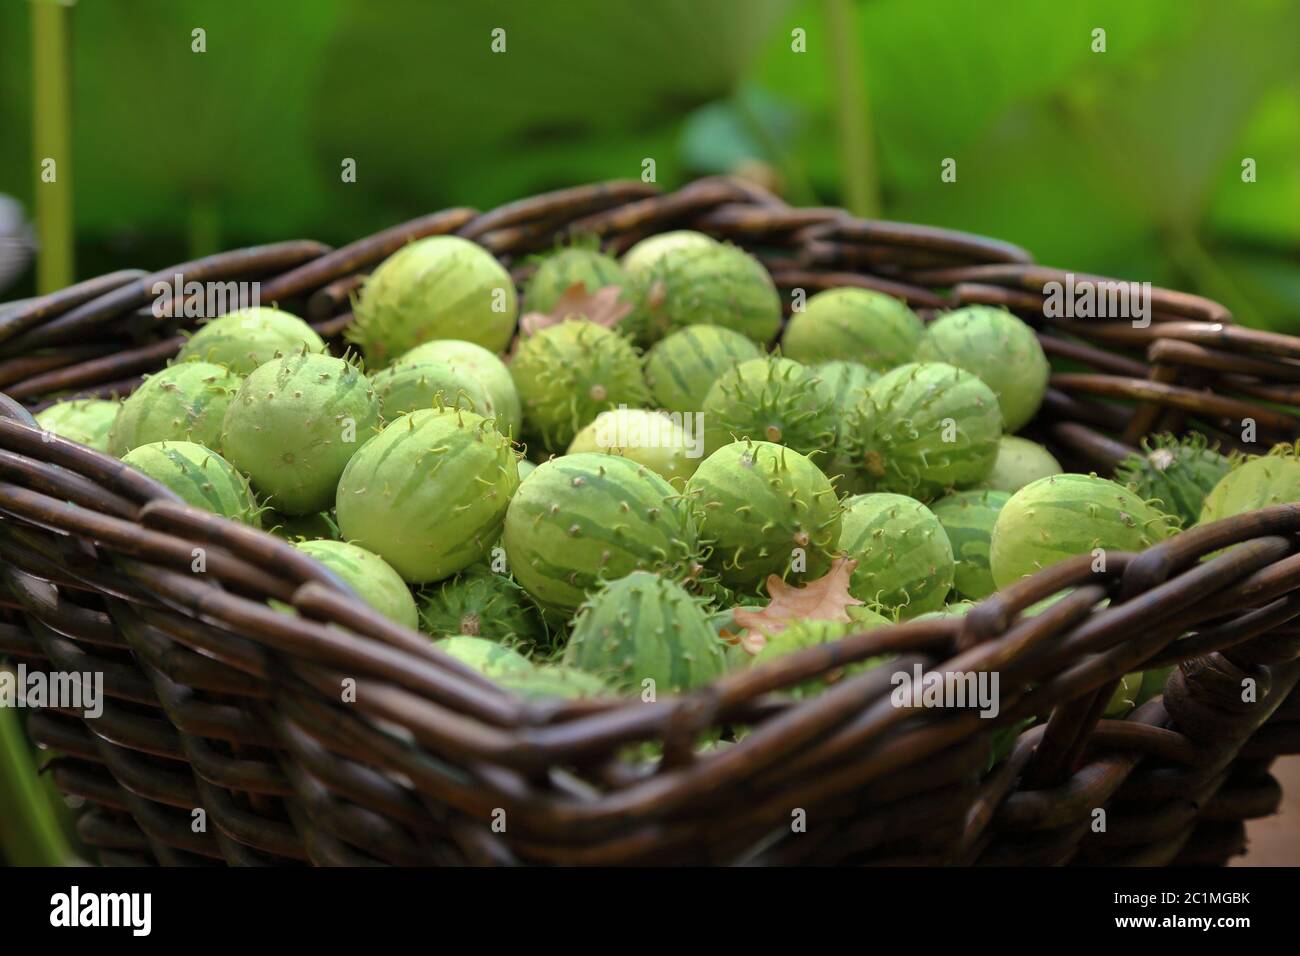 Bright green fruits of Melothria. Exotic cucumber from the family of pumpkin Stock Photo